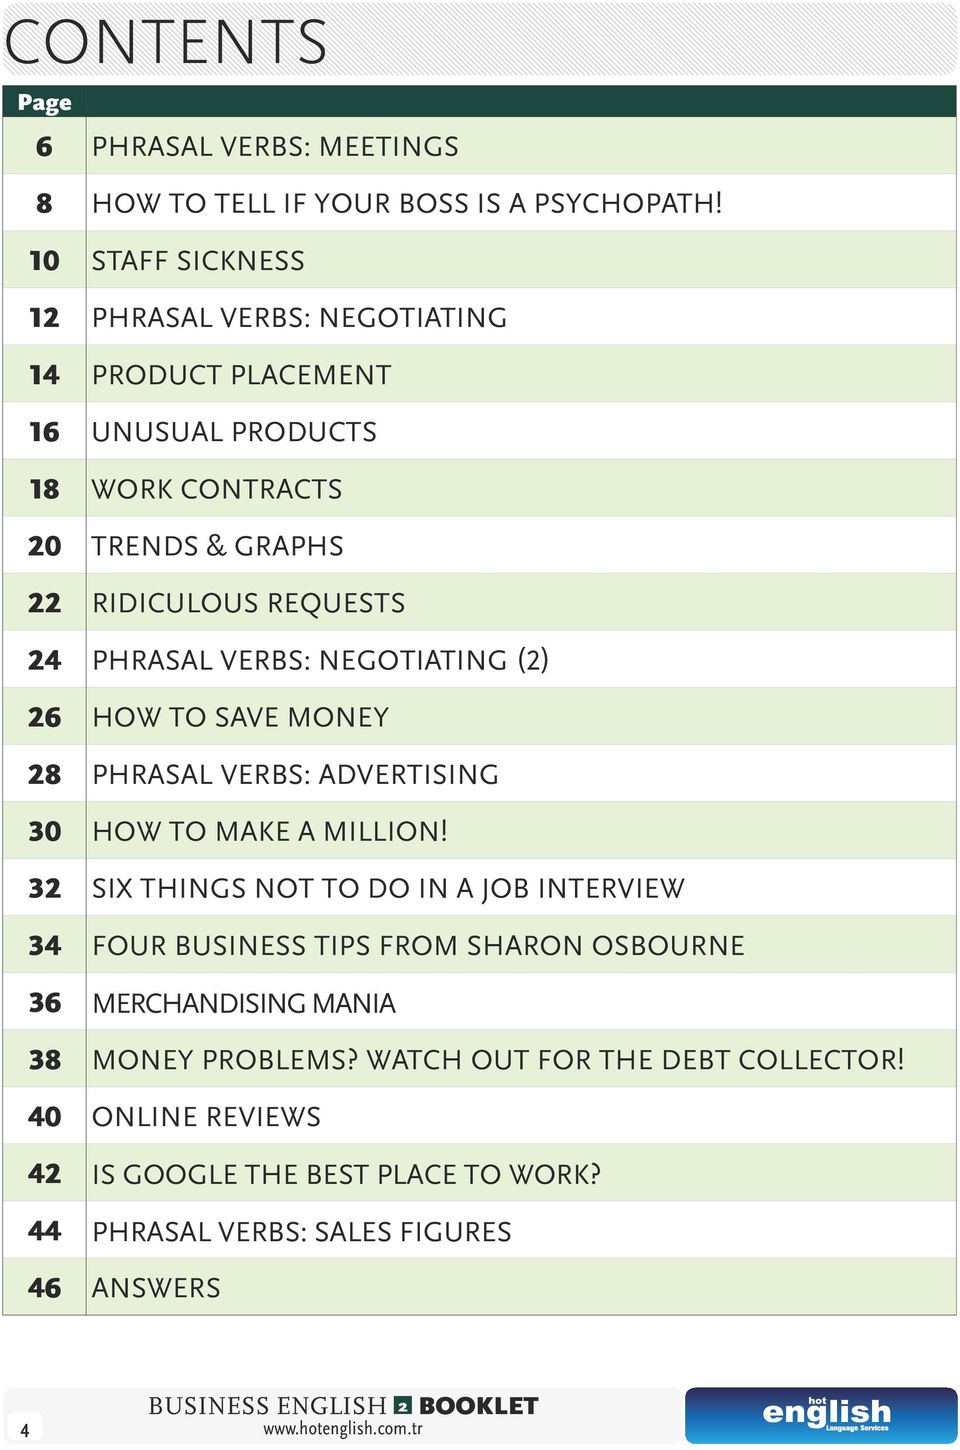 VERBS NEGOTIATING (2) 26 HOW TO SAVE MONEY 28 PHRASAL VERBS ADVERTISING 30 HOW TO MAKE A MILLION!